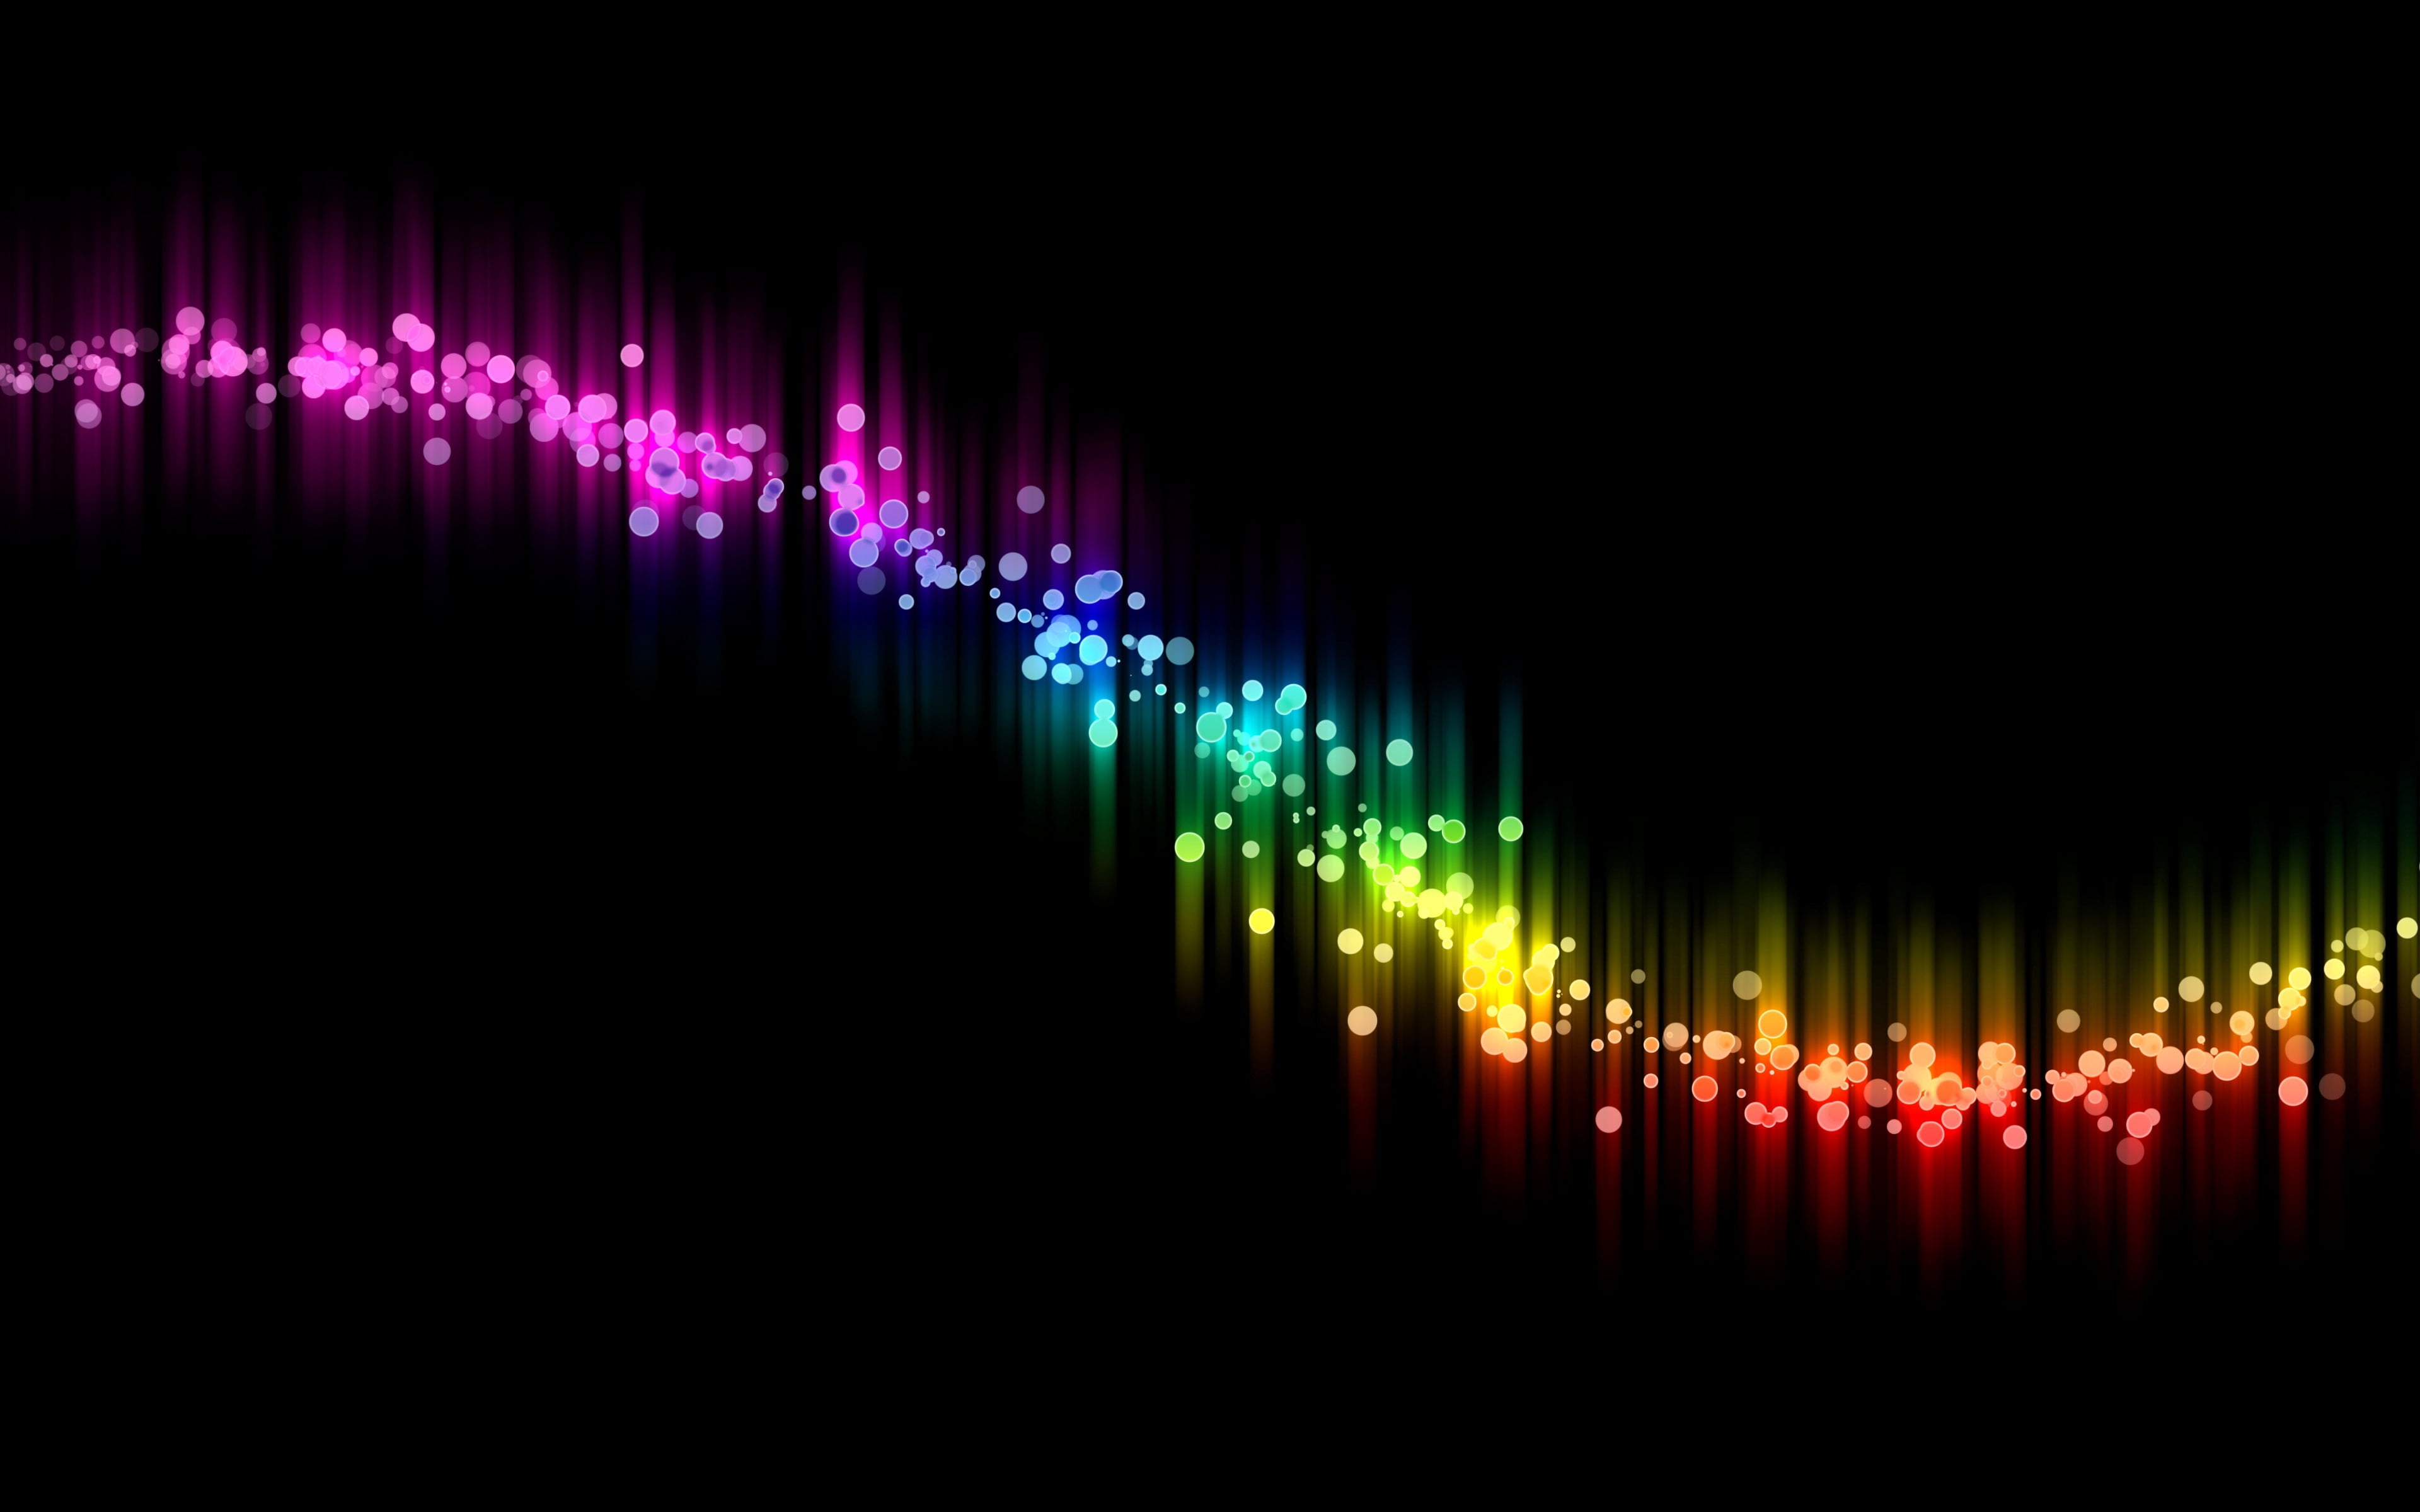 multicolored rainbow, abstract, black, colorful, curve, backgrounds